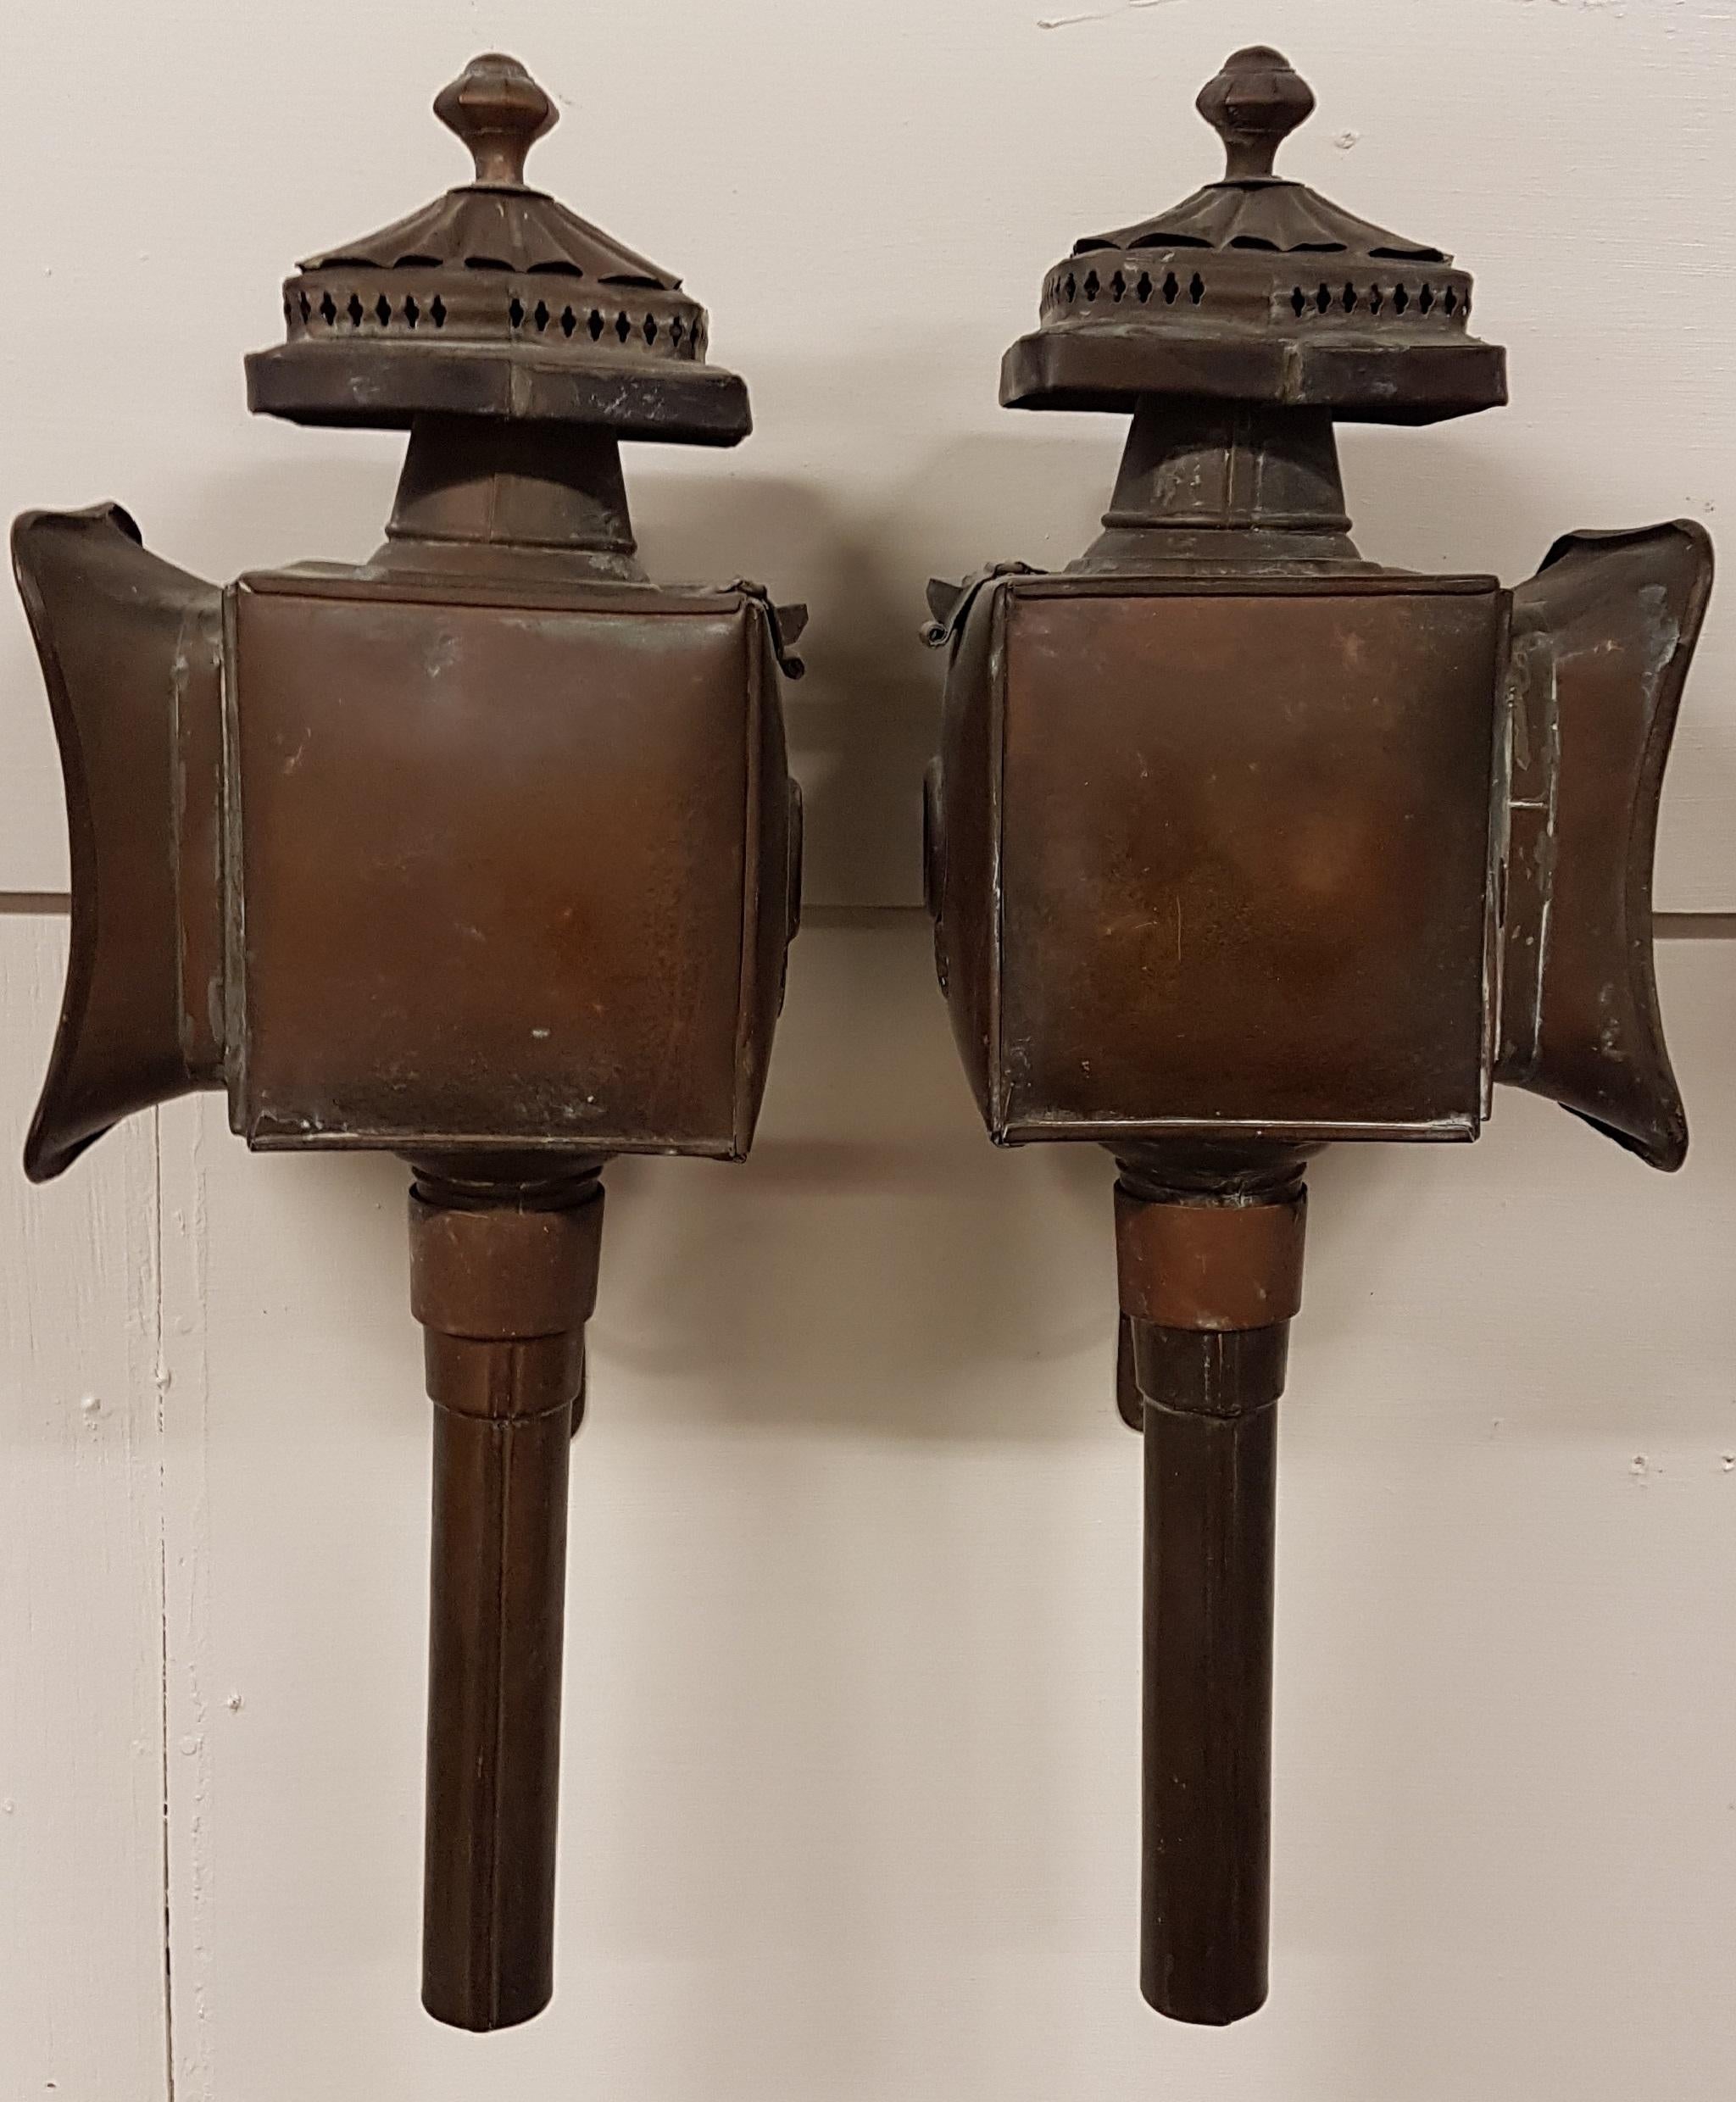 Pair of Brass and Copper Carriage Lanterns (Englisch)